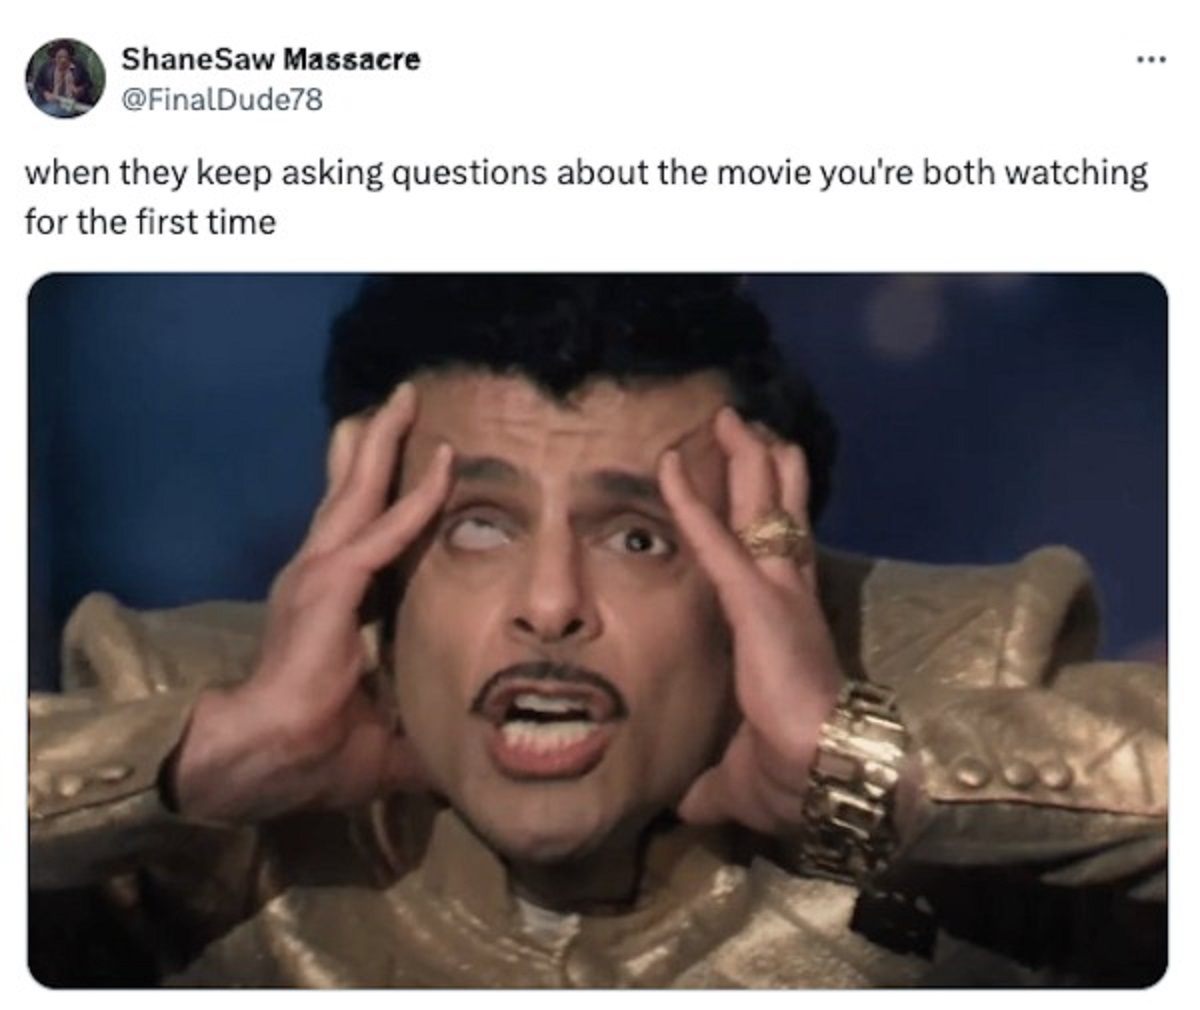 photo caption - ShaneSaw Massacre when they keep asking questions about the movie you're both watching for the first time